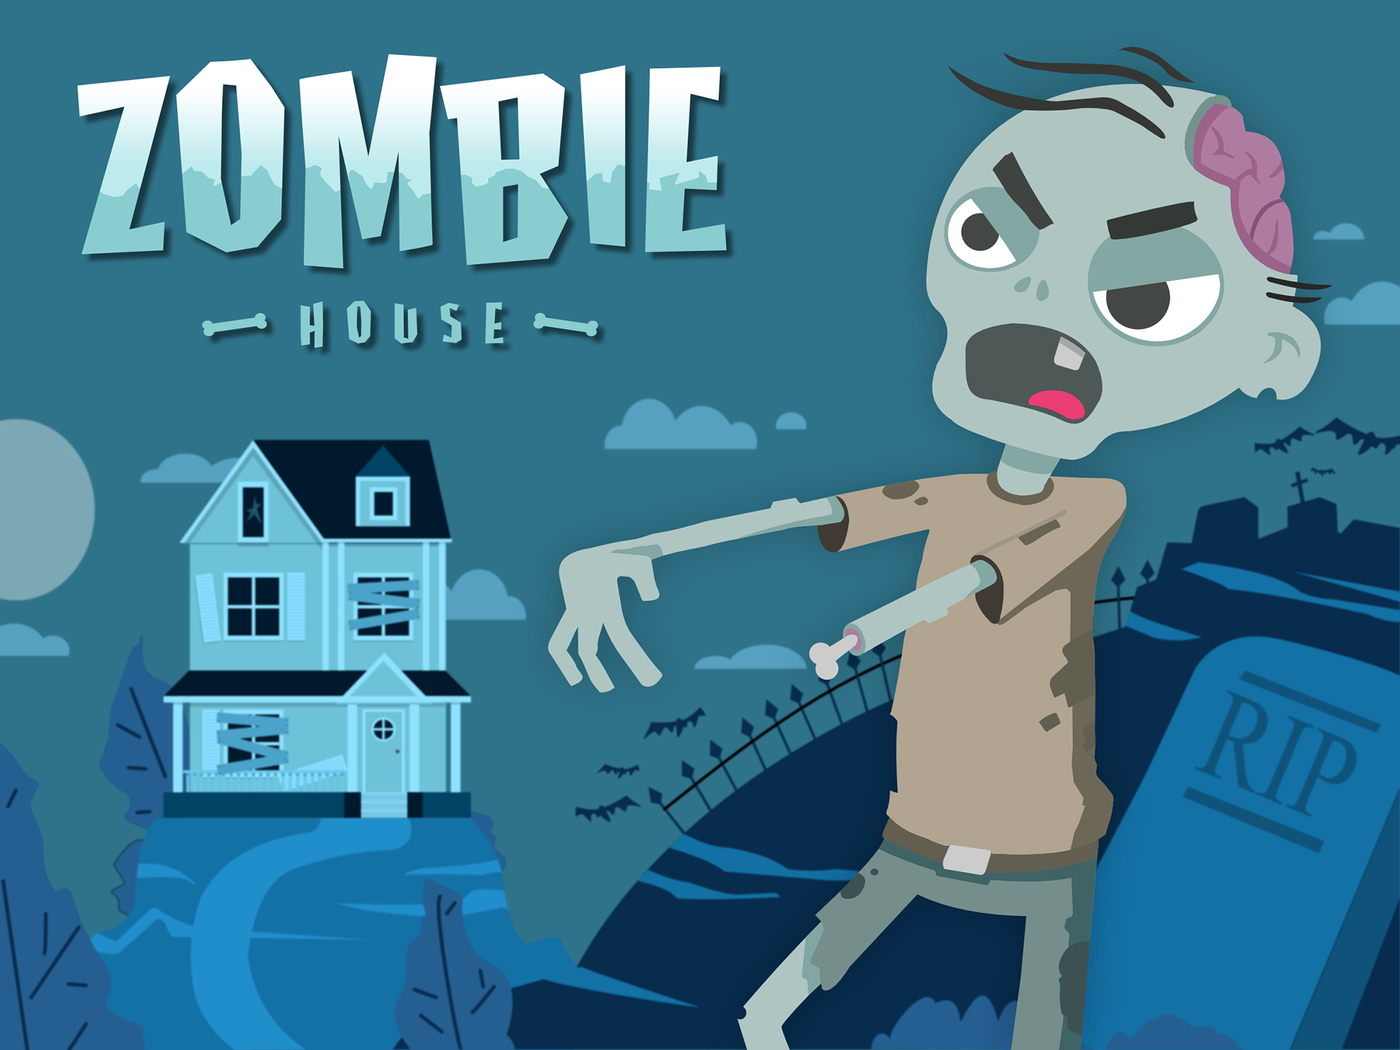 Zombie Poster
I did a Udemy online course on using Affinity Designer (by Brad Colbow) and this is the result :)
Keywords: Zombie House Drawing SVG